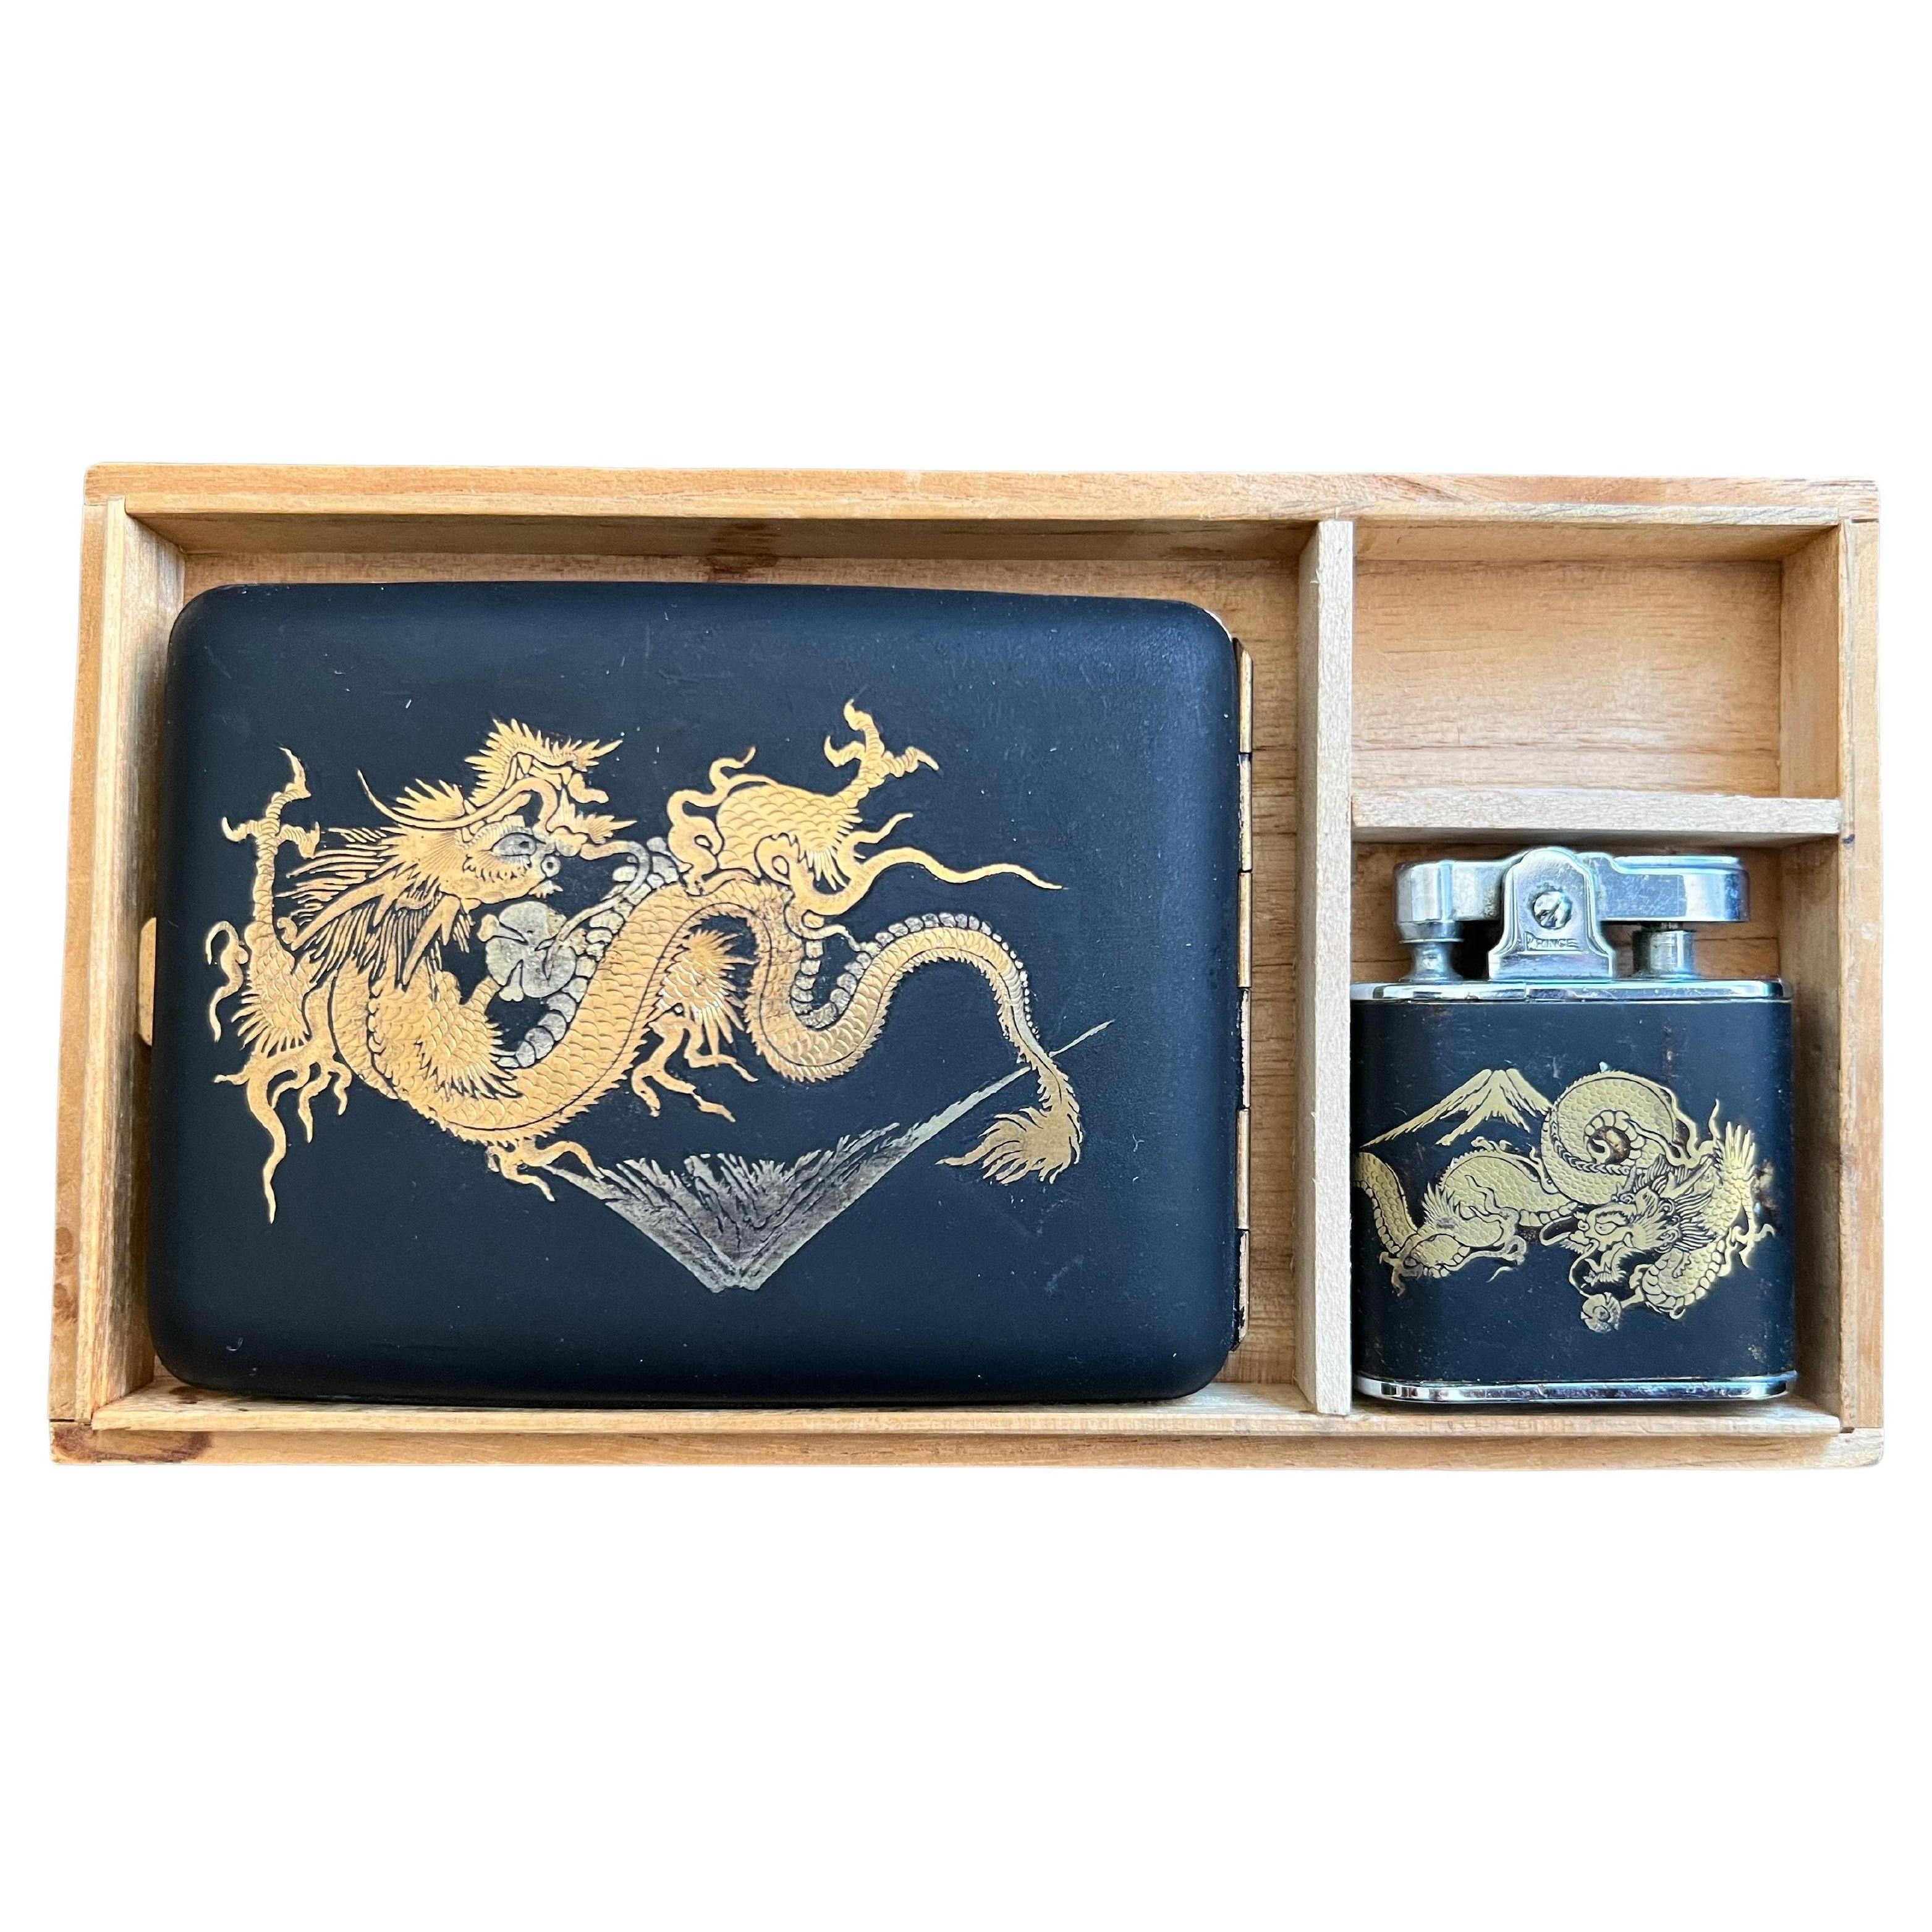 WWII Japanese Matching Komai Damascene Dragon STYLISH  Cigarette Case & Cigarette Lighter
Yellow Gold Decorated 24K
Japanese Komai Style Cigarette Case & Lighter Set Meiji Period
This antique Japanese cigarette case is signed and dates to